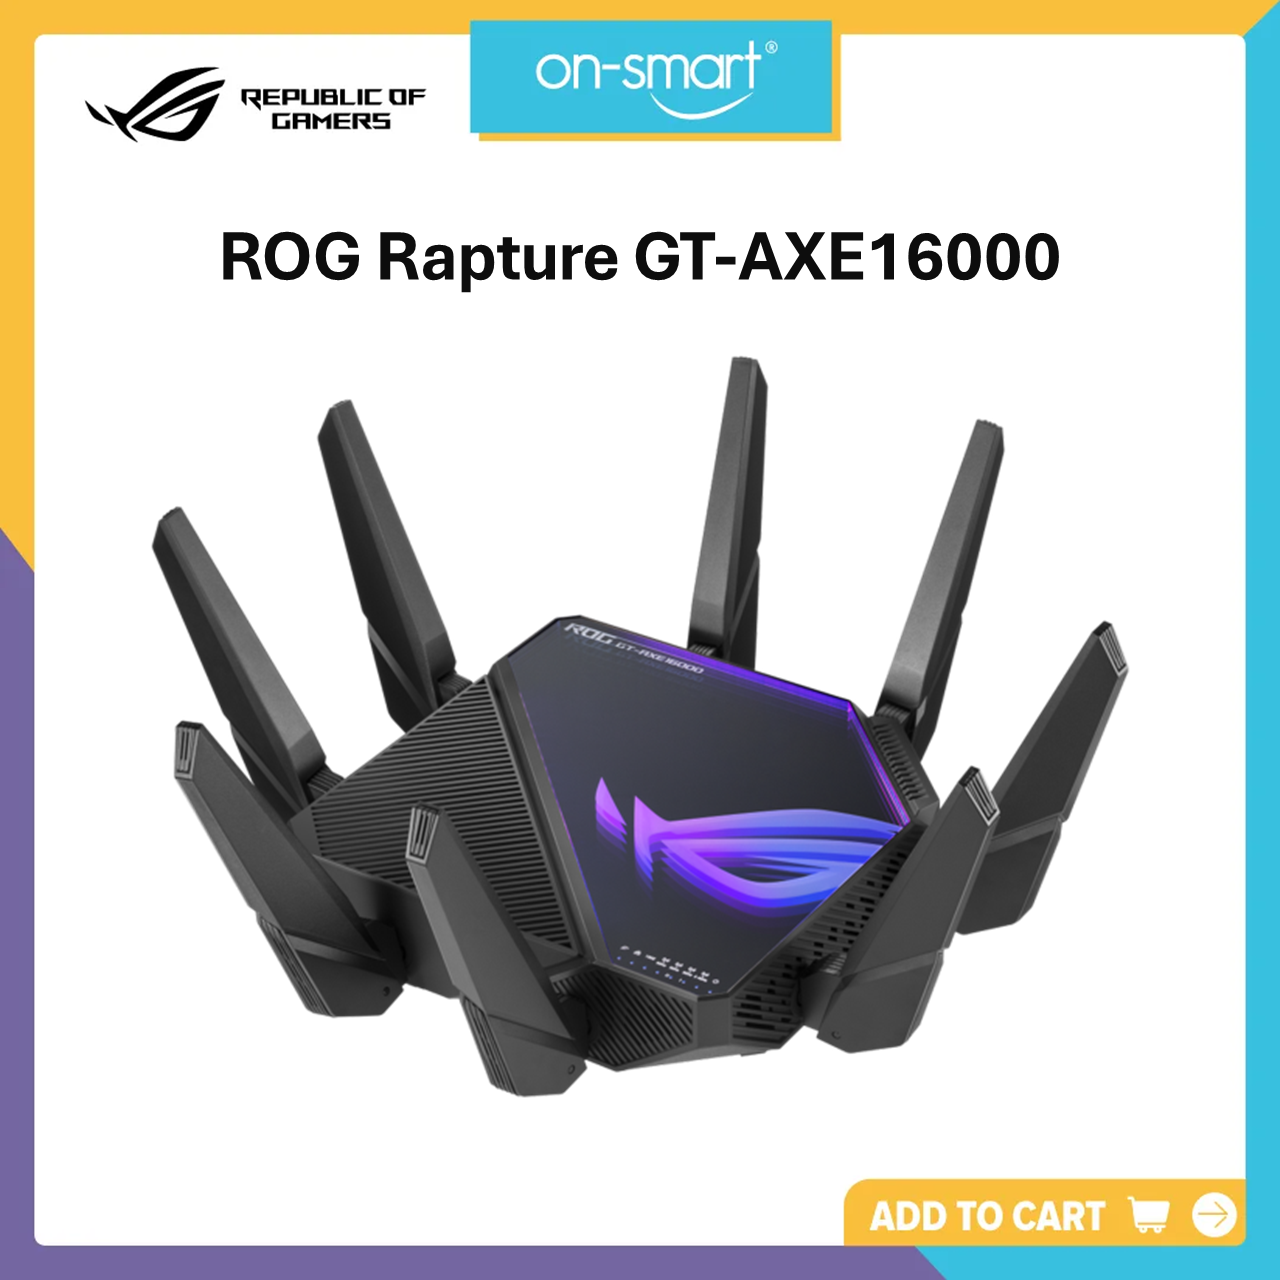 Asus ROG Rapture GT-AXE16000 Quad-Band WiFi 6E Gaming Router